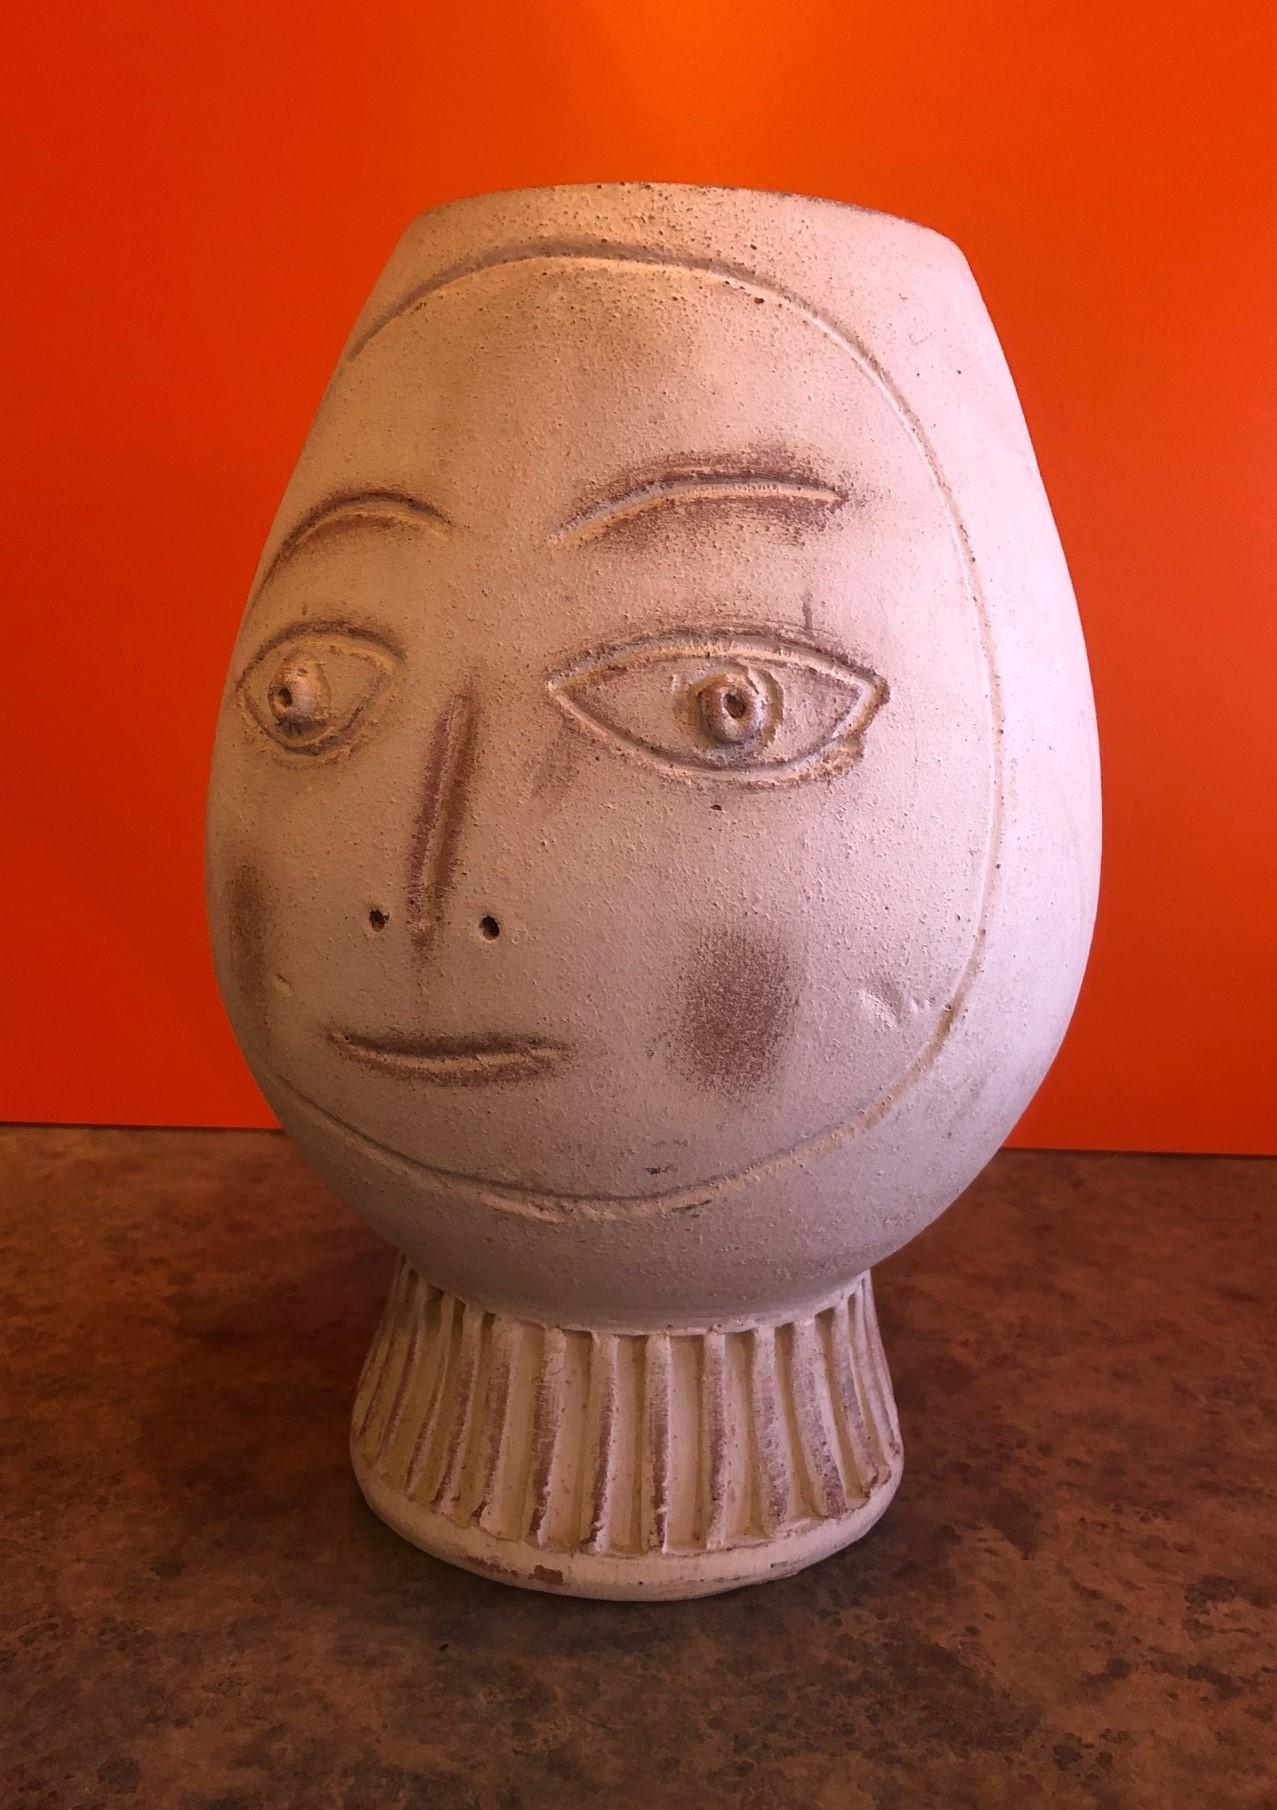 A very nice figural pottery vase in the style of Pablo Picasso, circa 1970s.